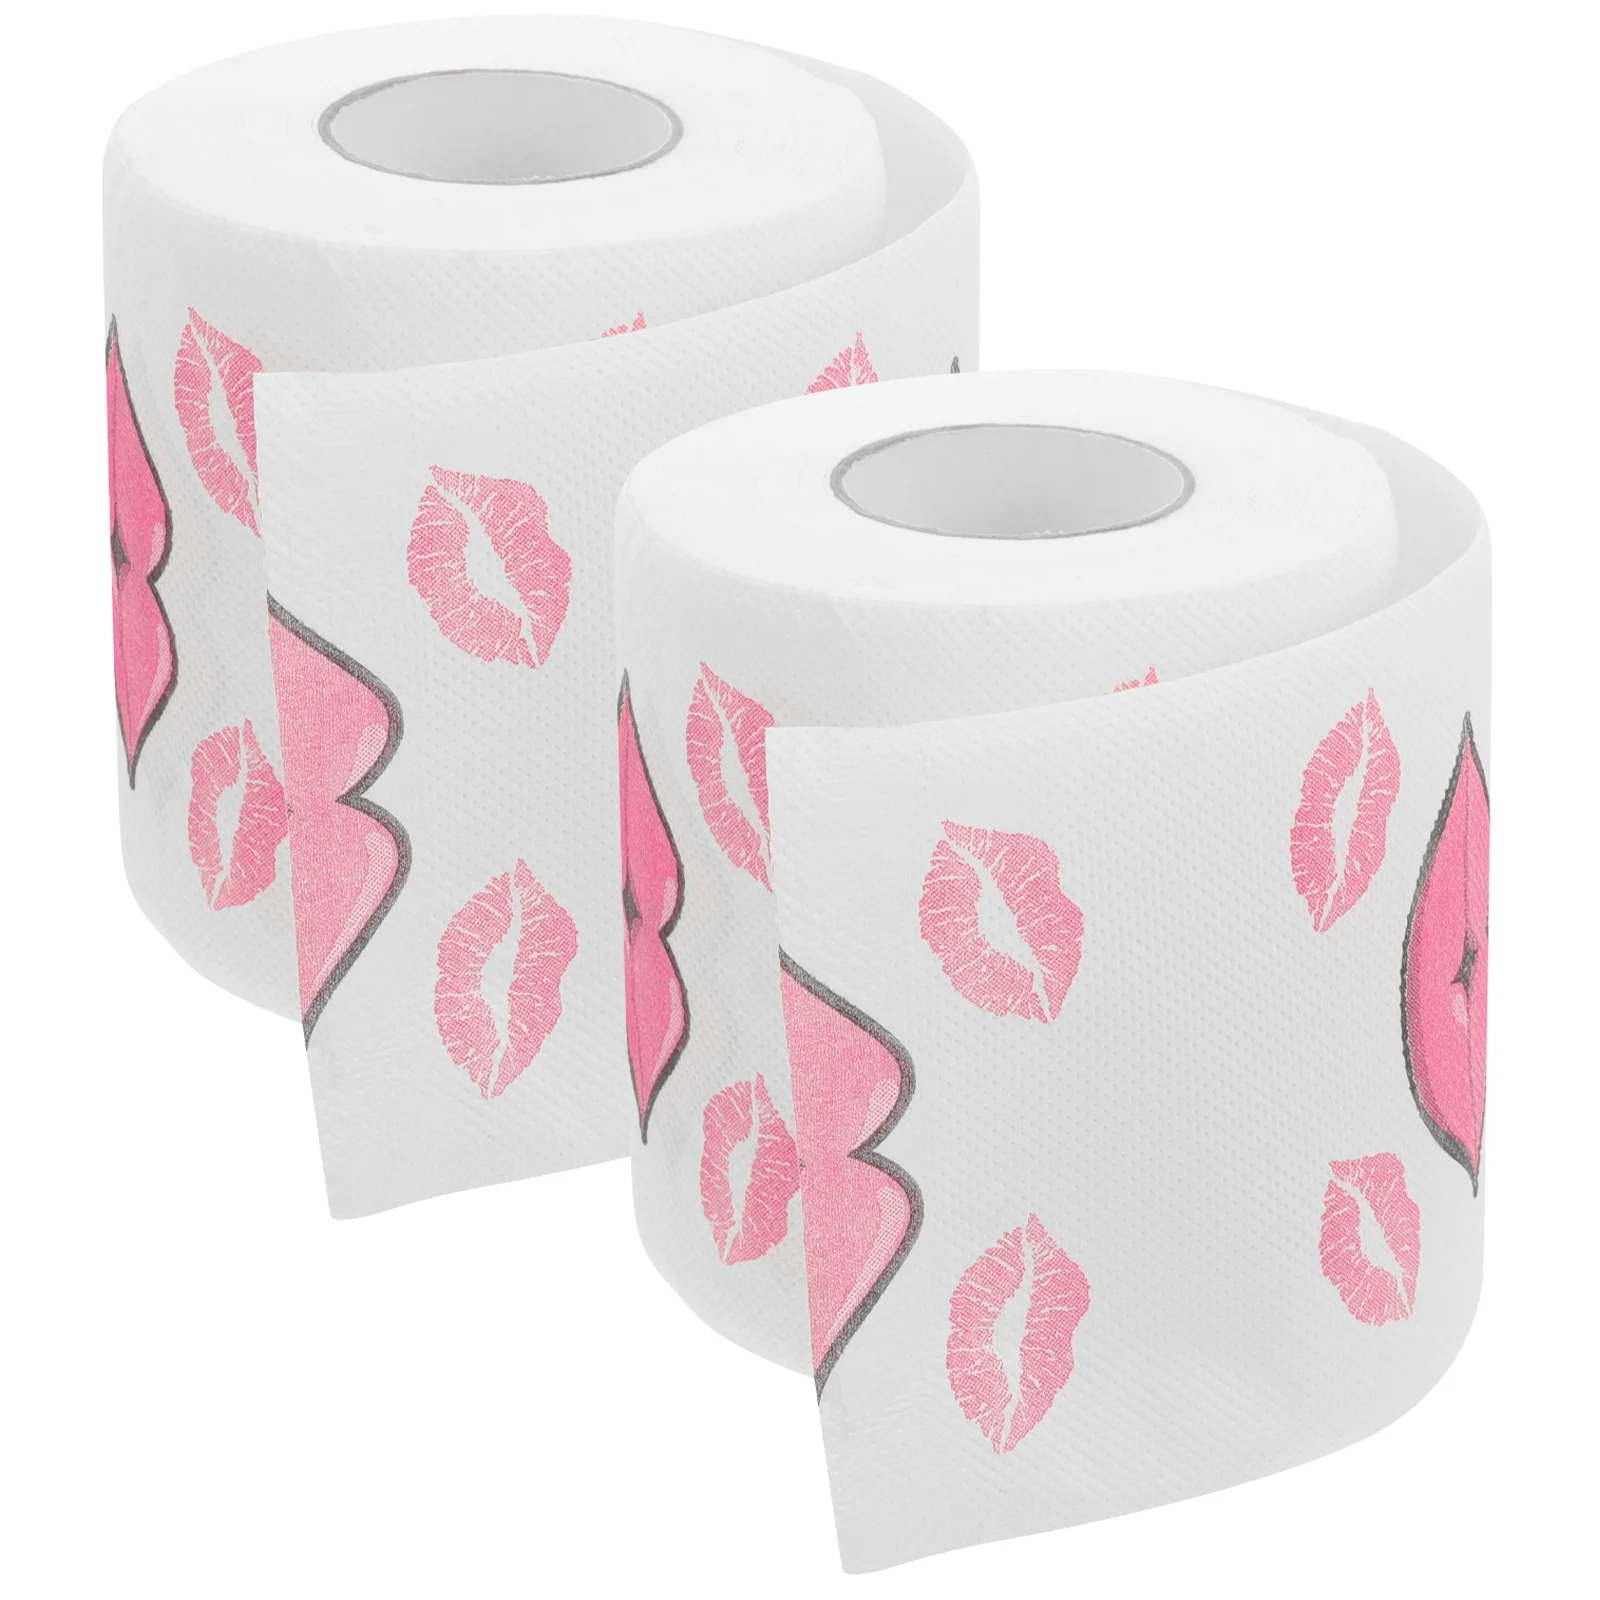 

2 Rolls Printing Bath Towel Red Mouth Tissue Bulk Paper Towels Toilet Bathroom Accessory